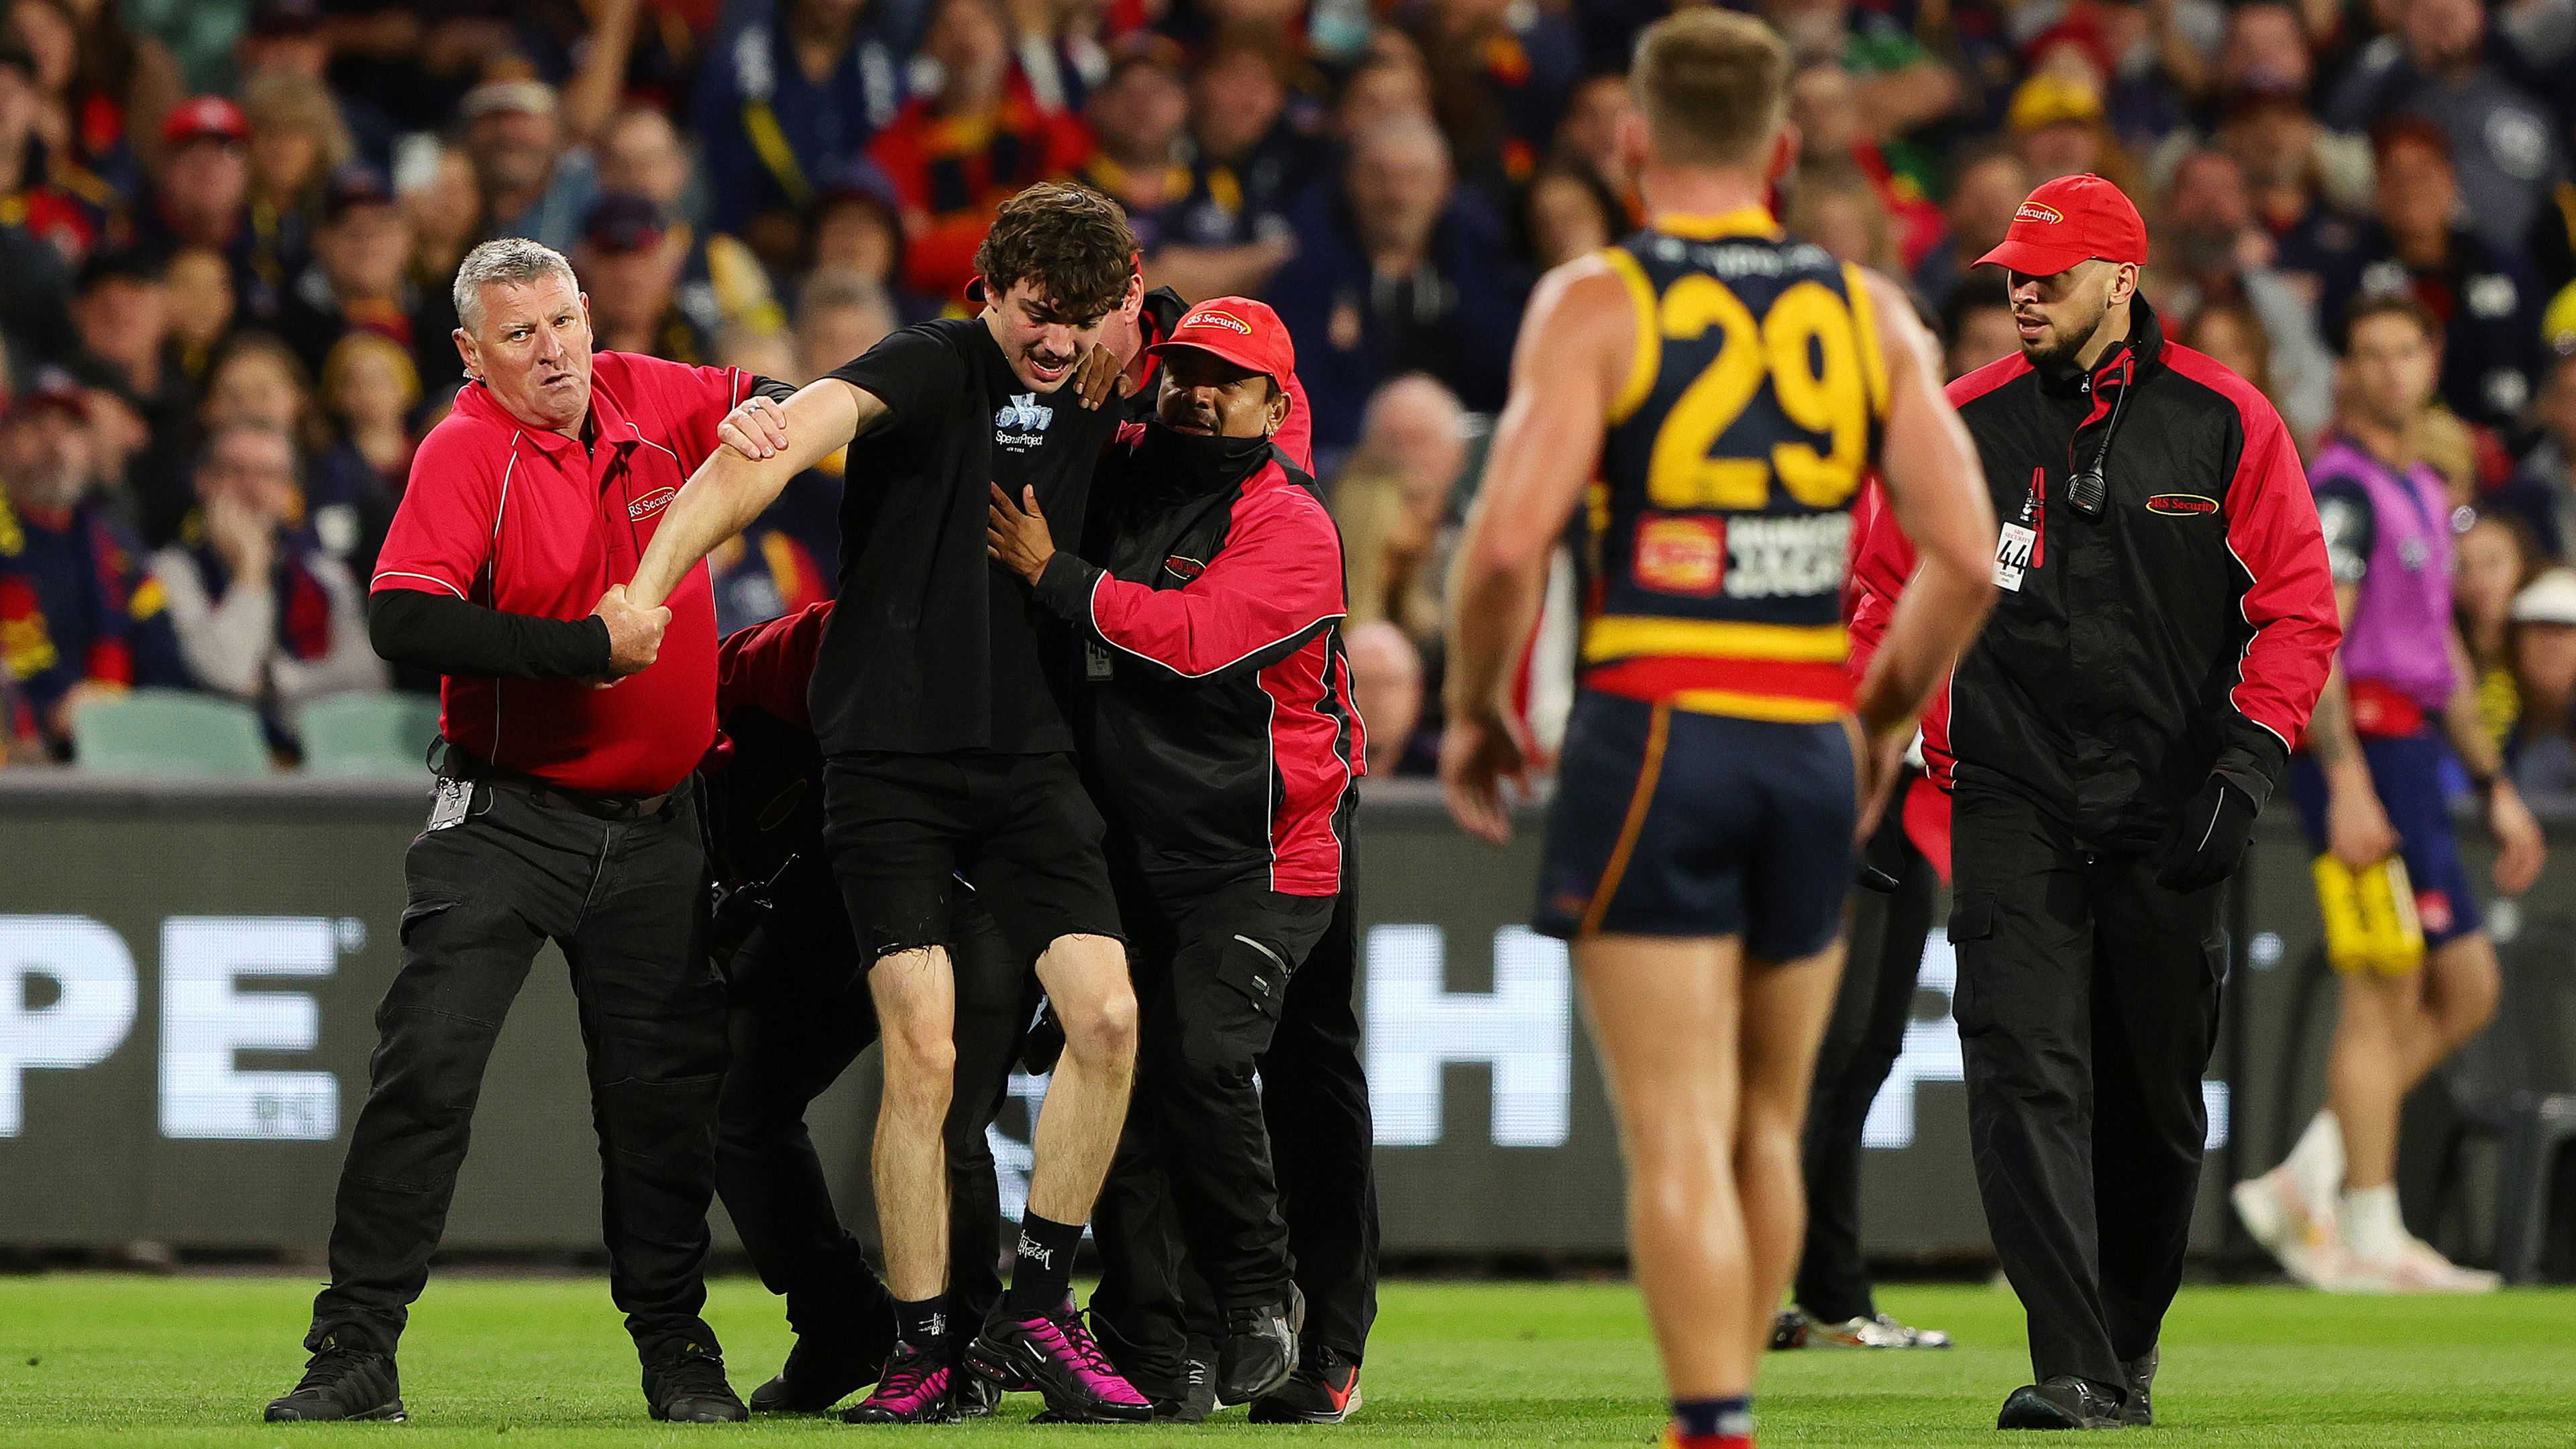 A pitch Invader is removed from Adelaide Oval.